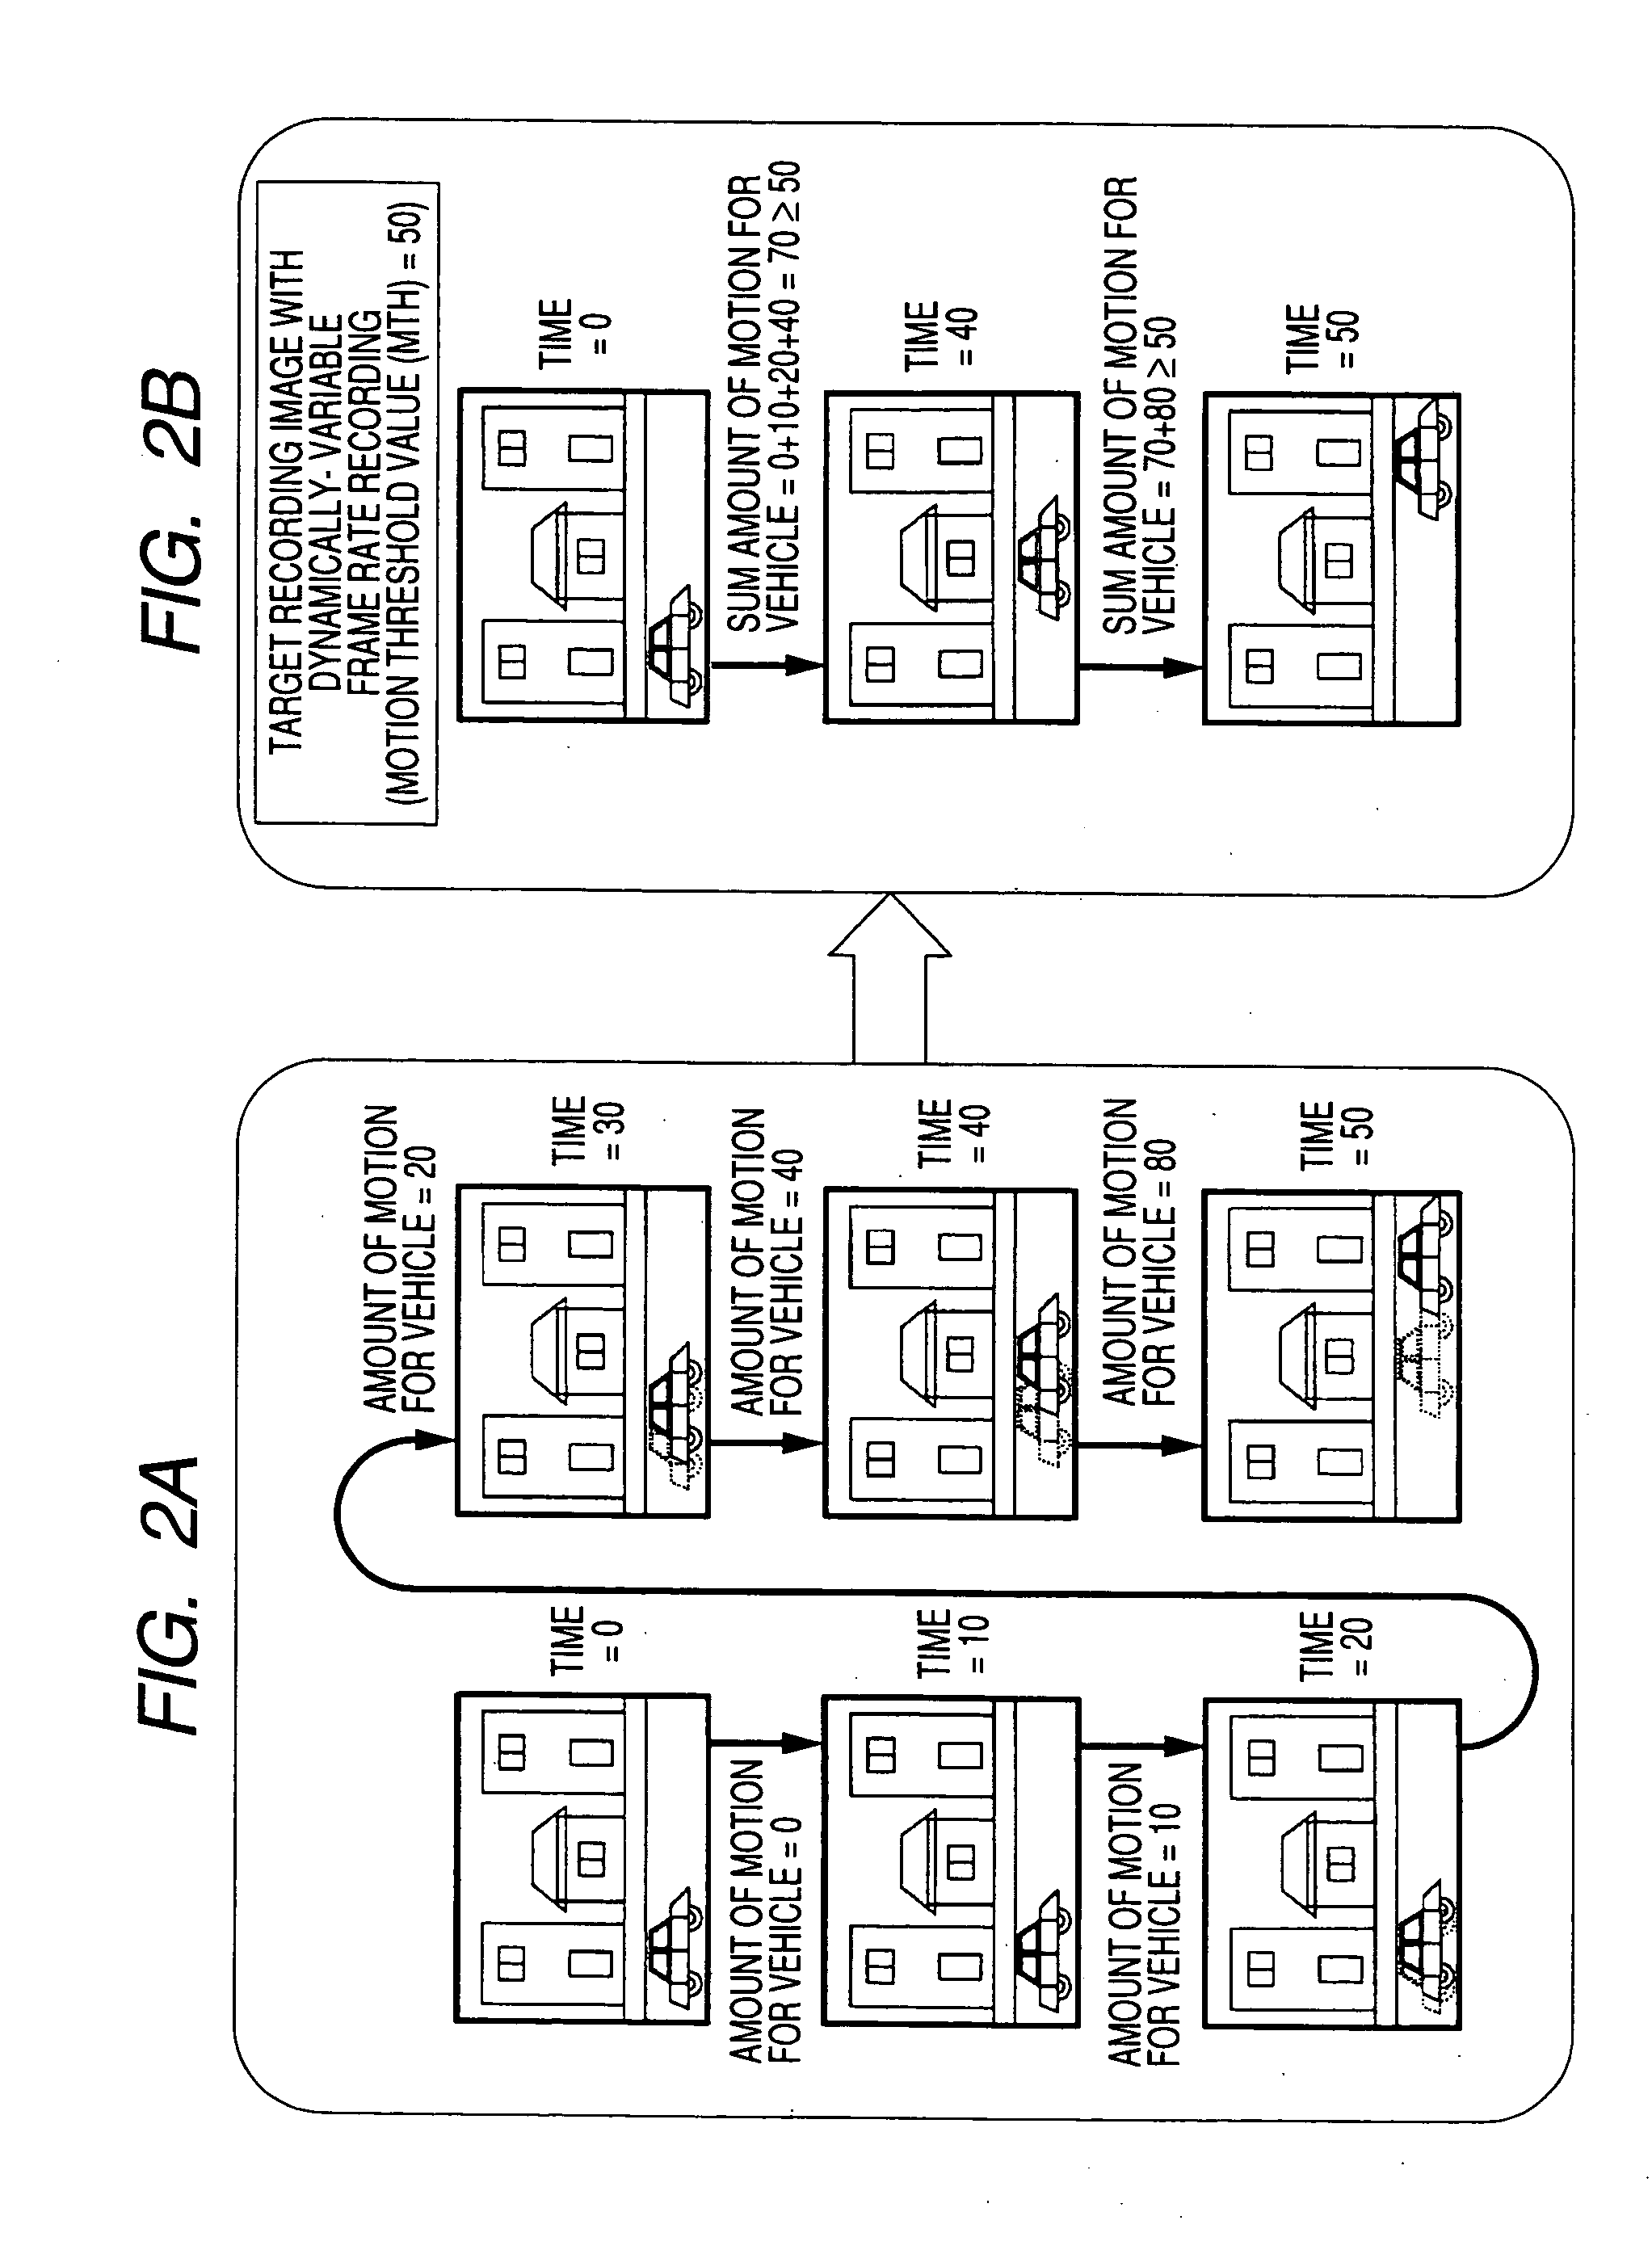 Image signal processing device, imaging device, and image signal processing method